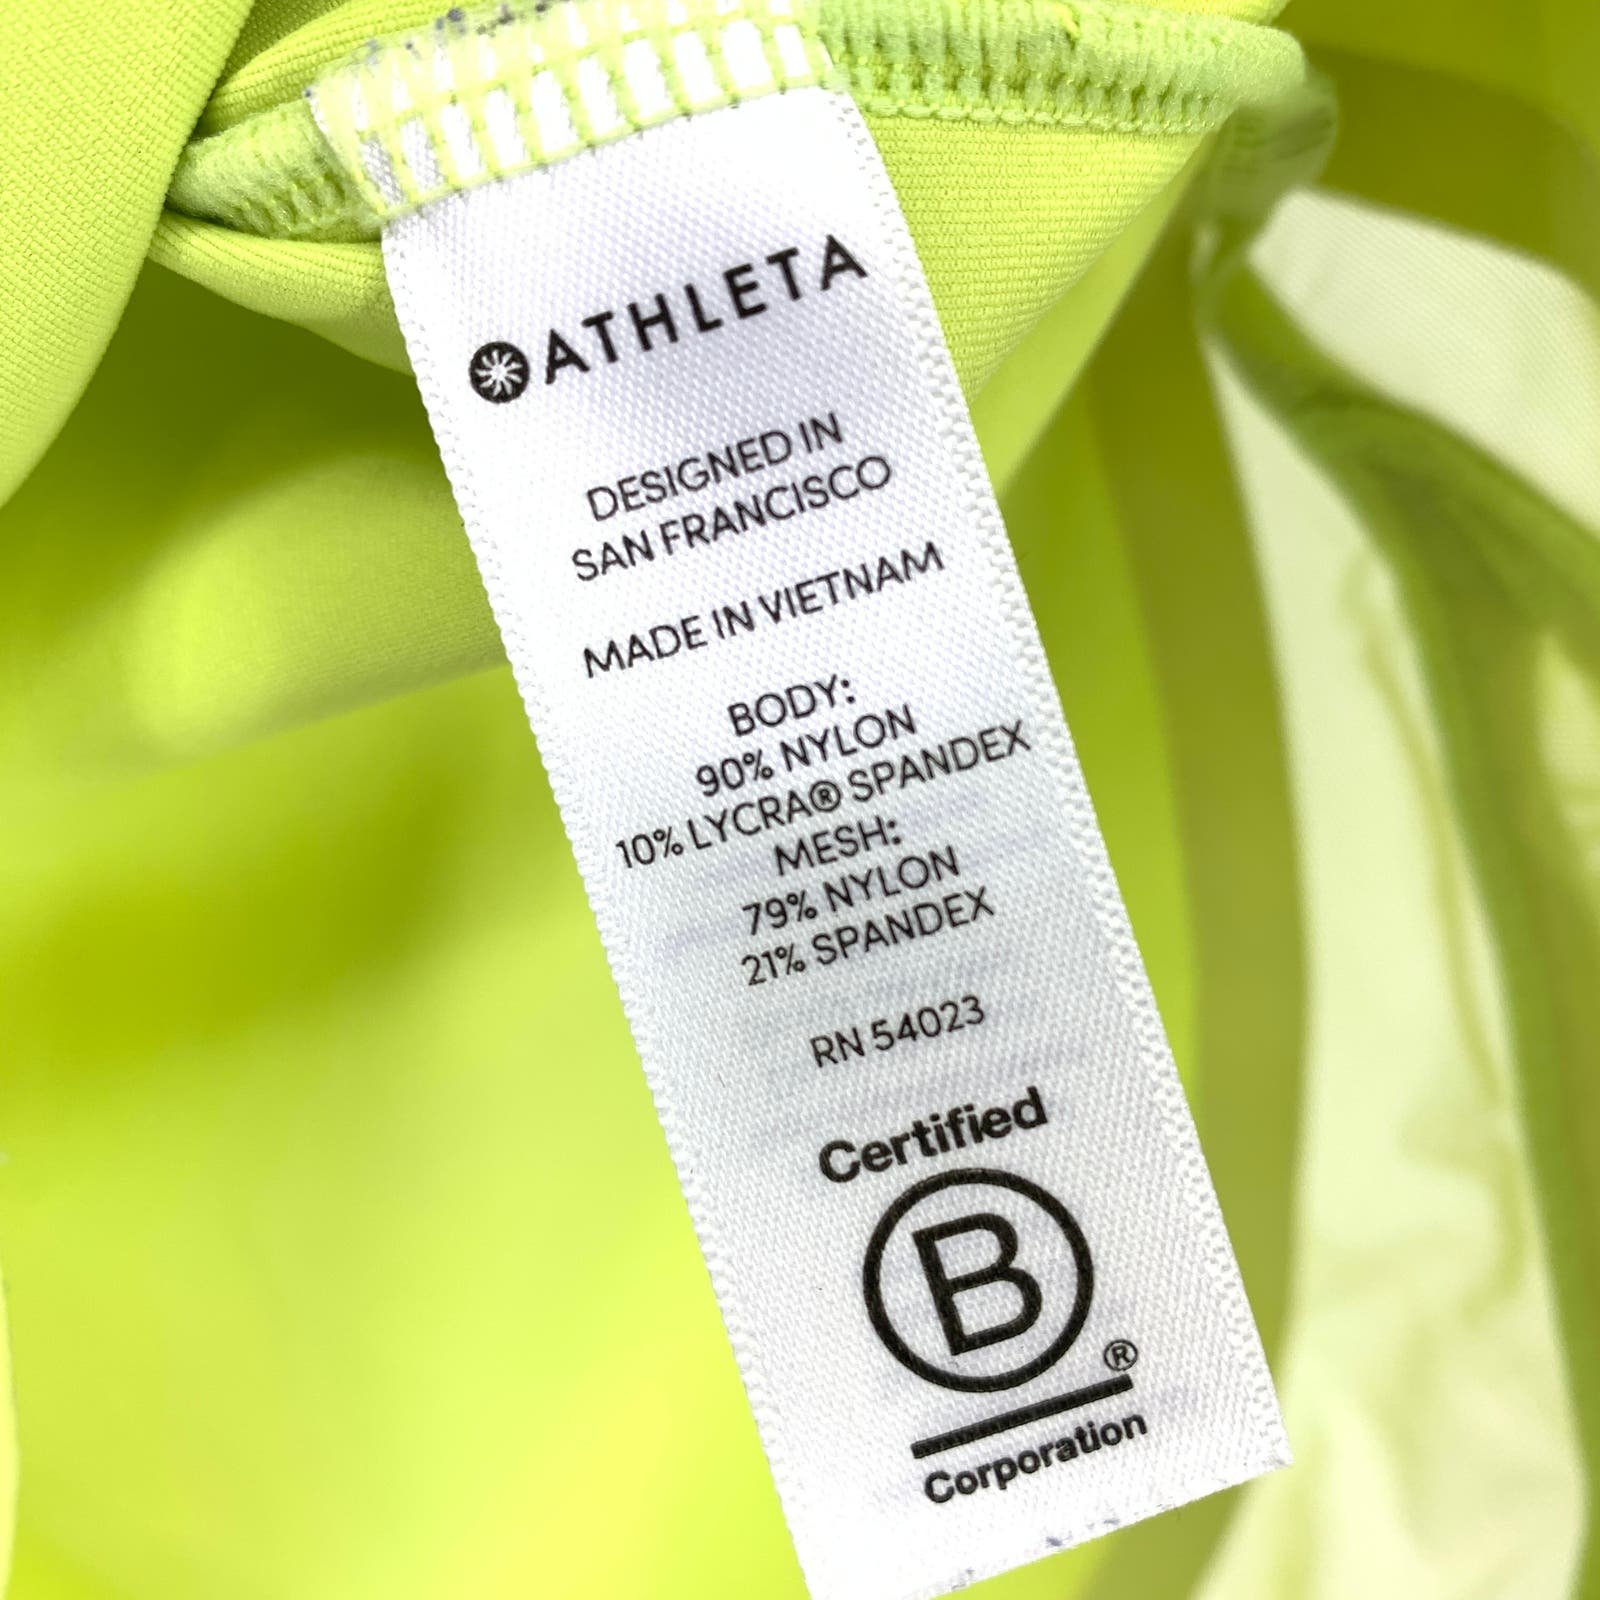 Special offer  Athleta Tank Top Women´s Size Small Muscle Tee Sleeveless Neon Yellow P4GzFTEp3 outlet online shop